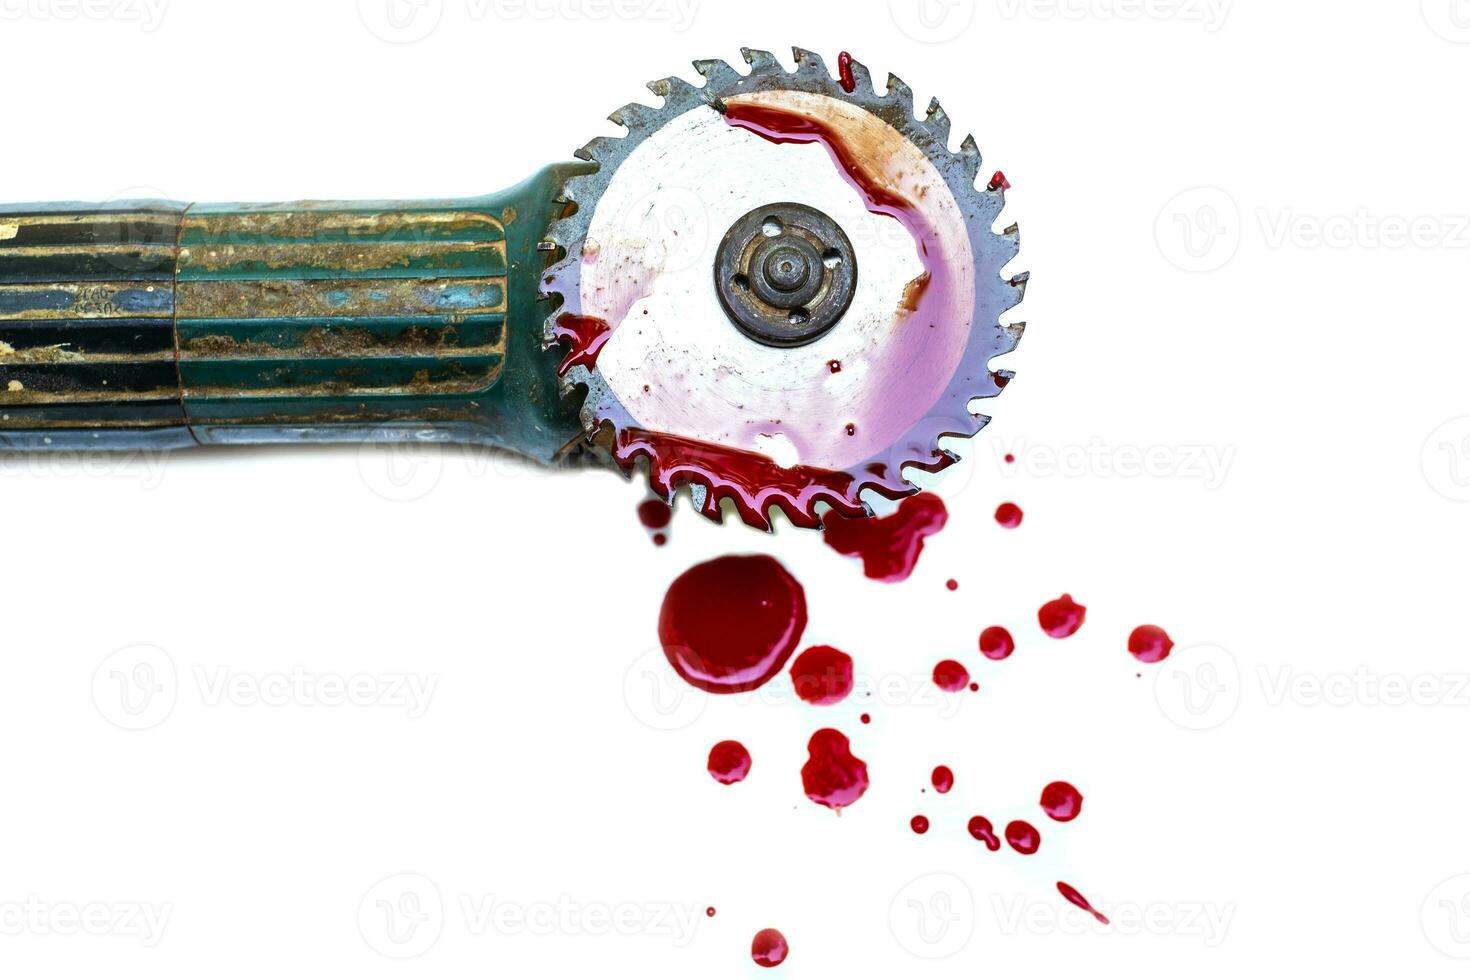 Circular saw disc bloody on white background photo